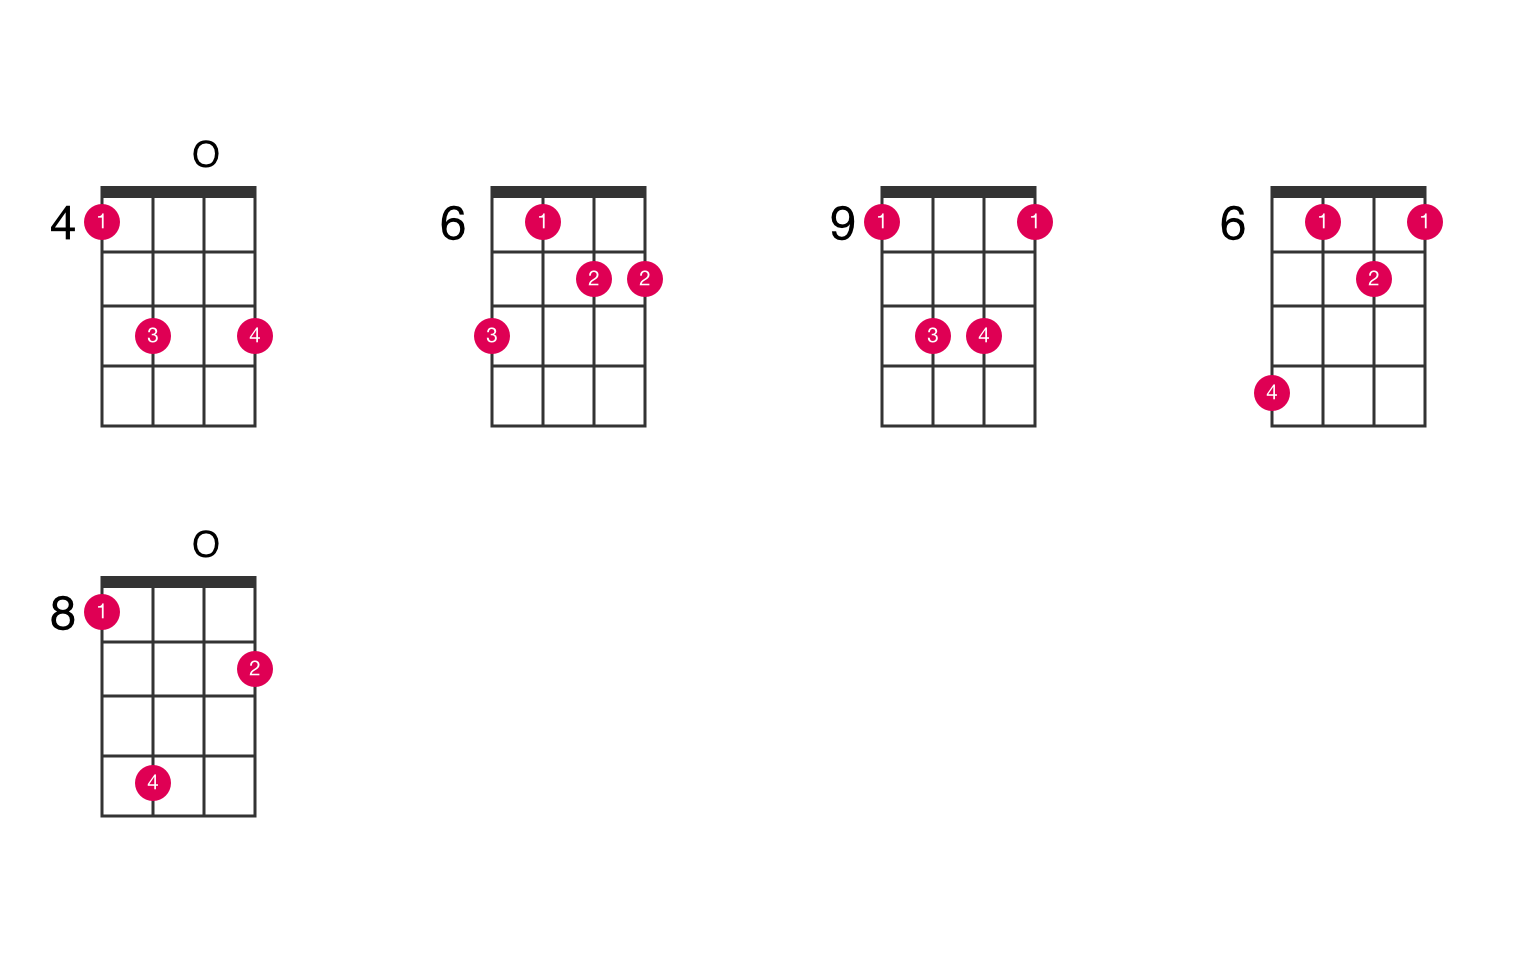 View ukulele chords chart for EM7sus2 chord along with suggested finger pos...